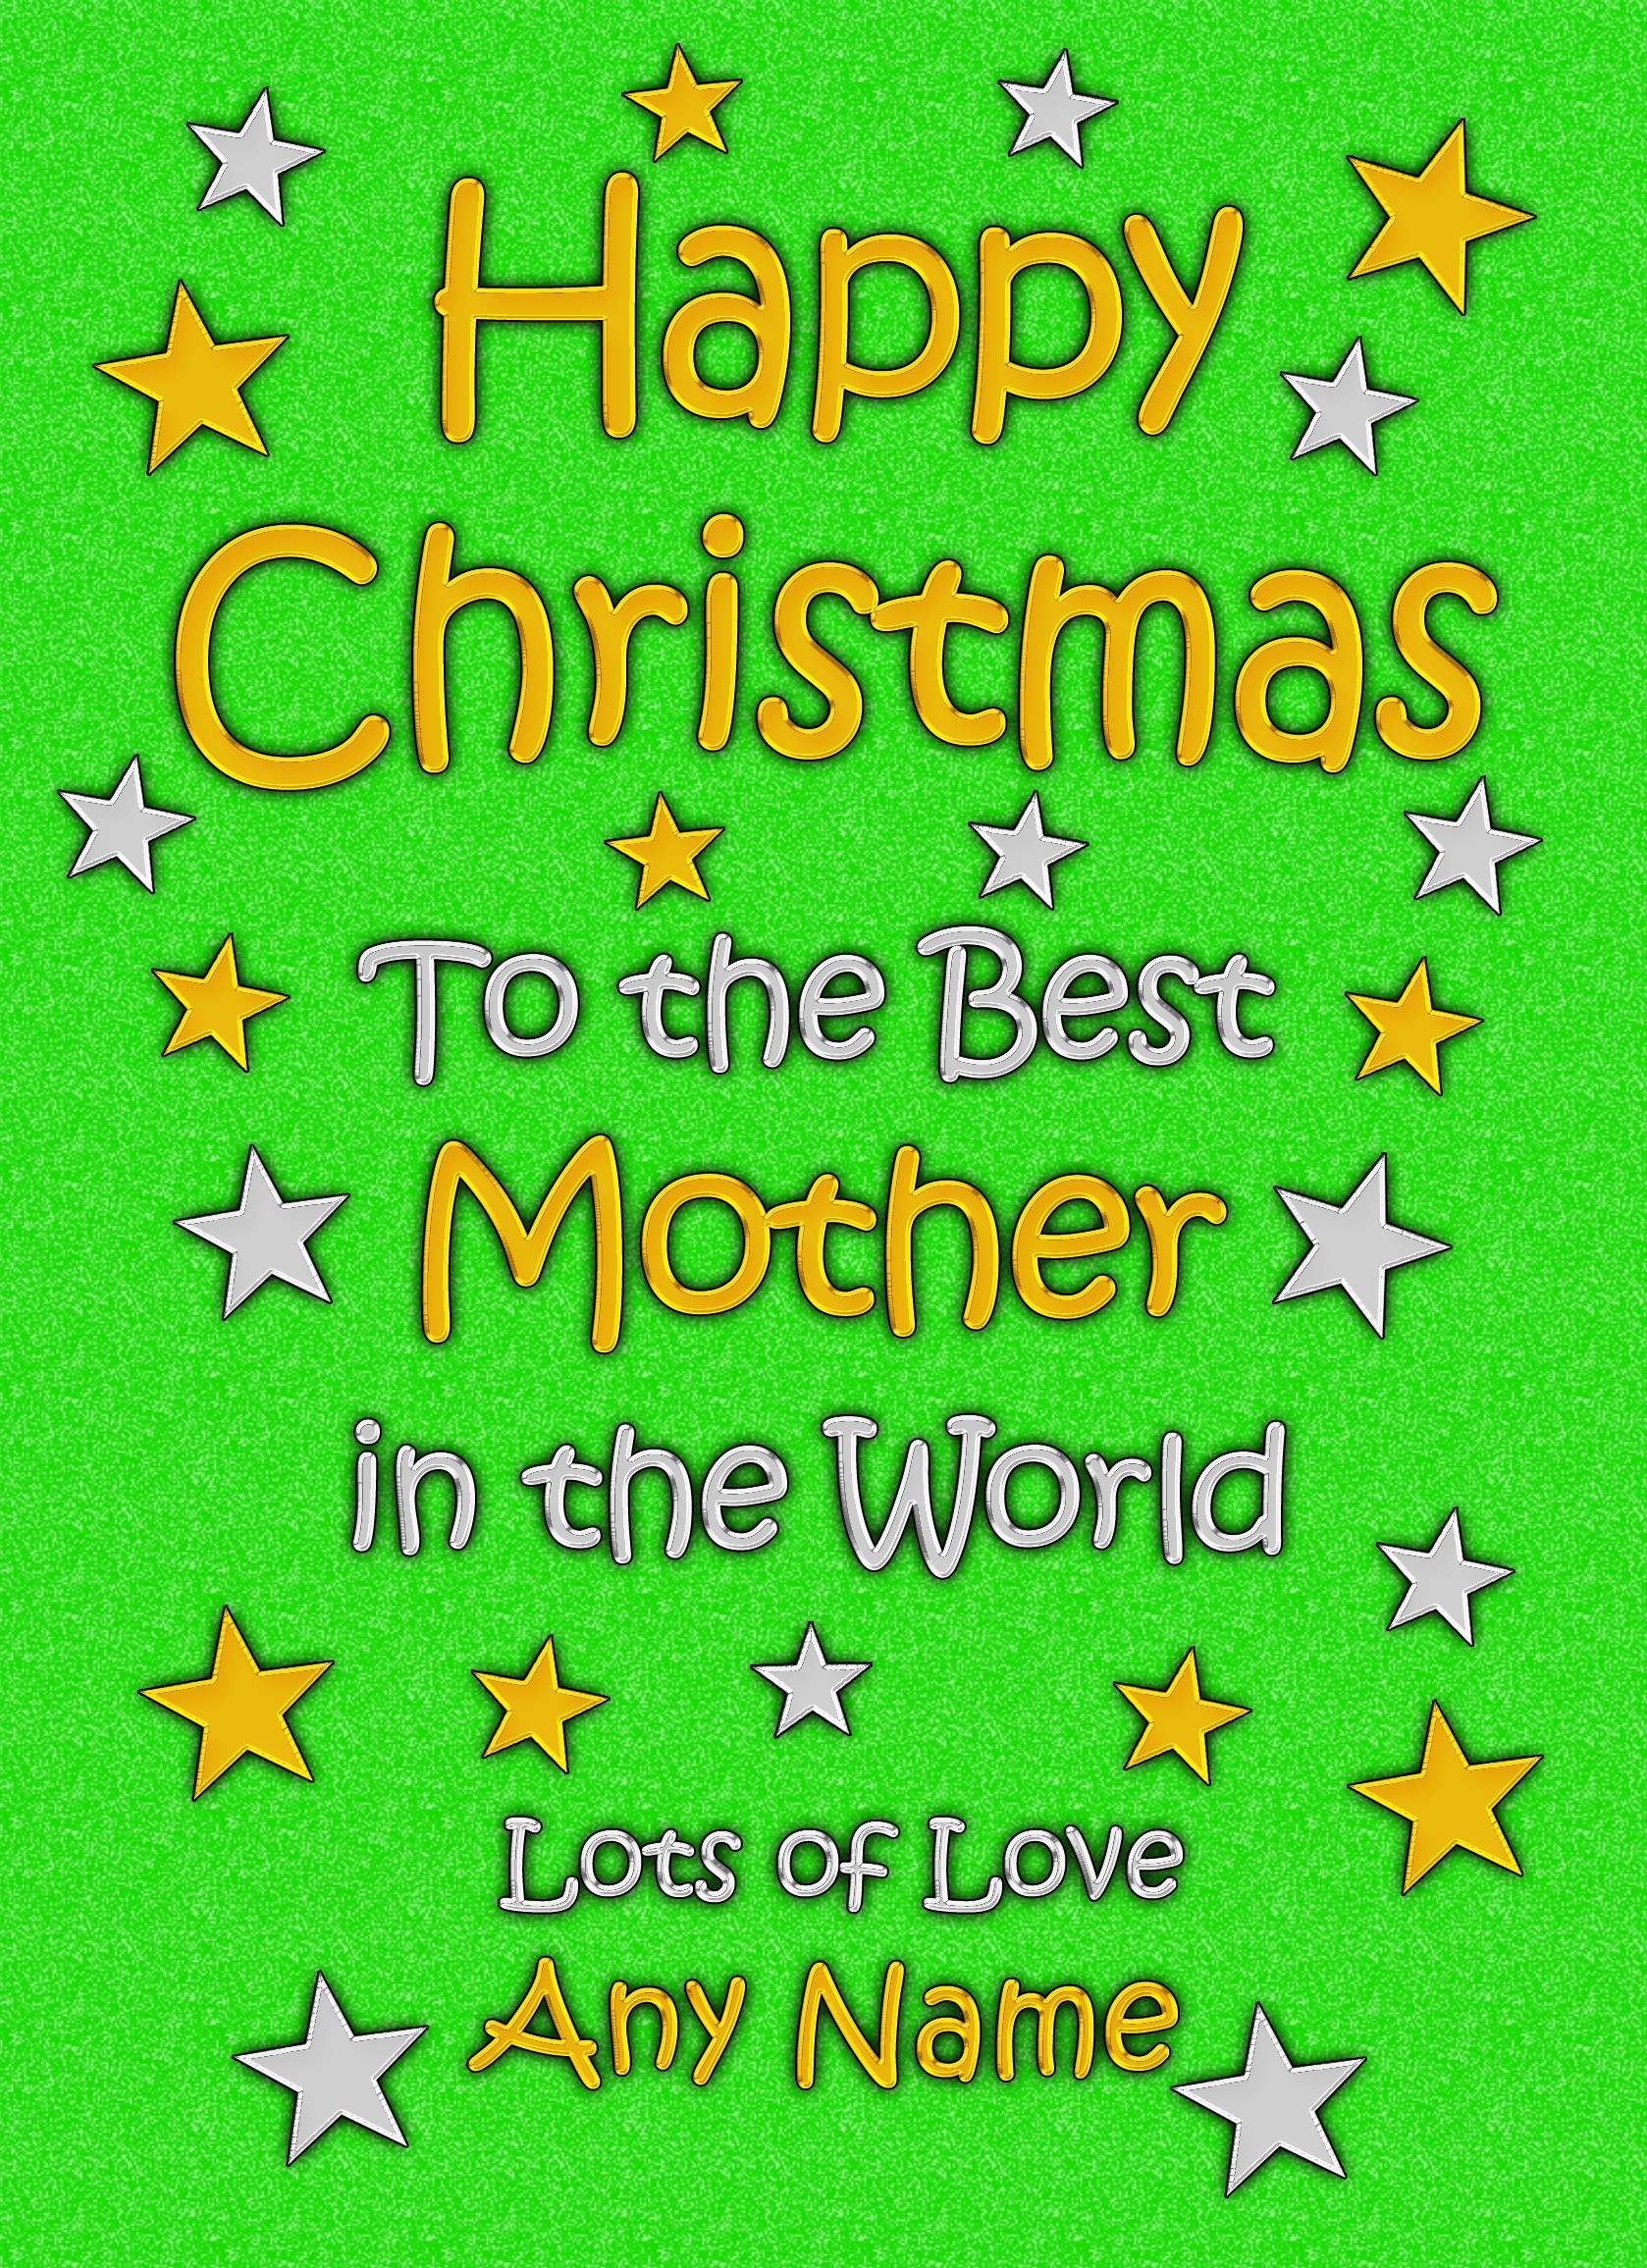 Personalised Mother Christmas Card (Green)